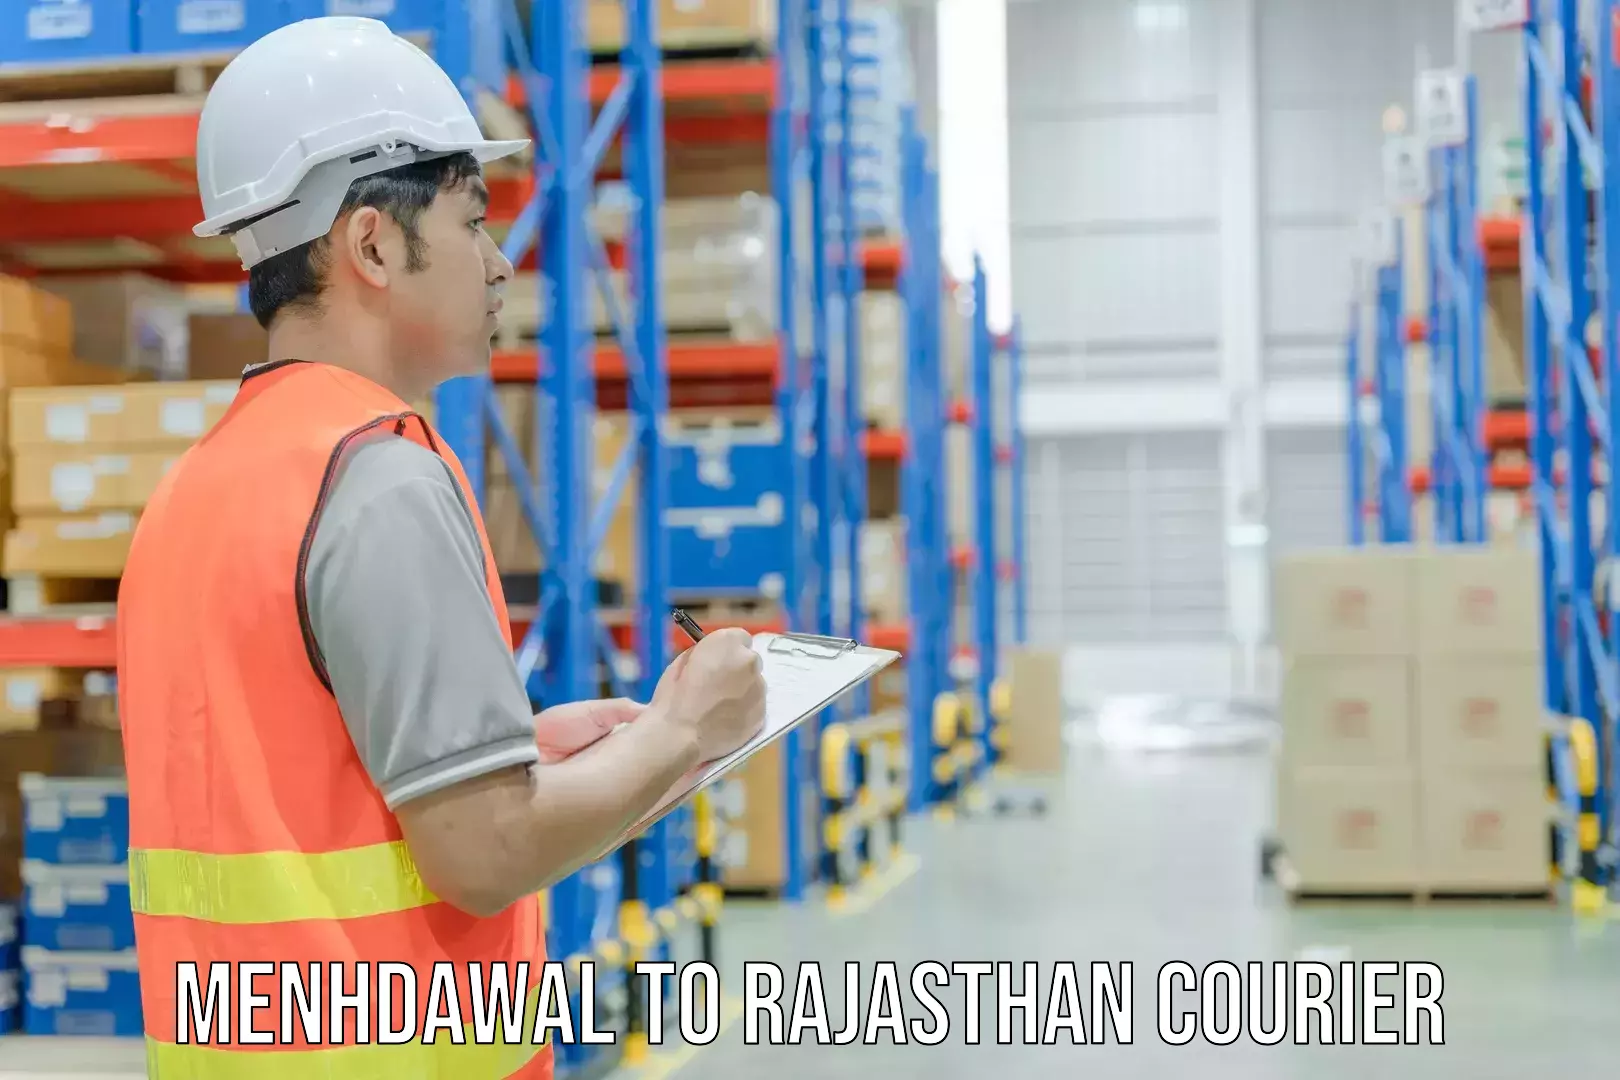 Nationwide courier service Menhdawal to Sultana